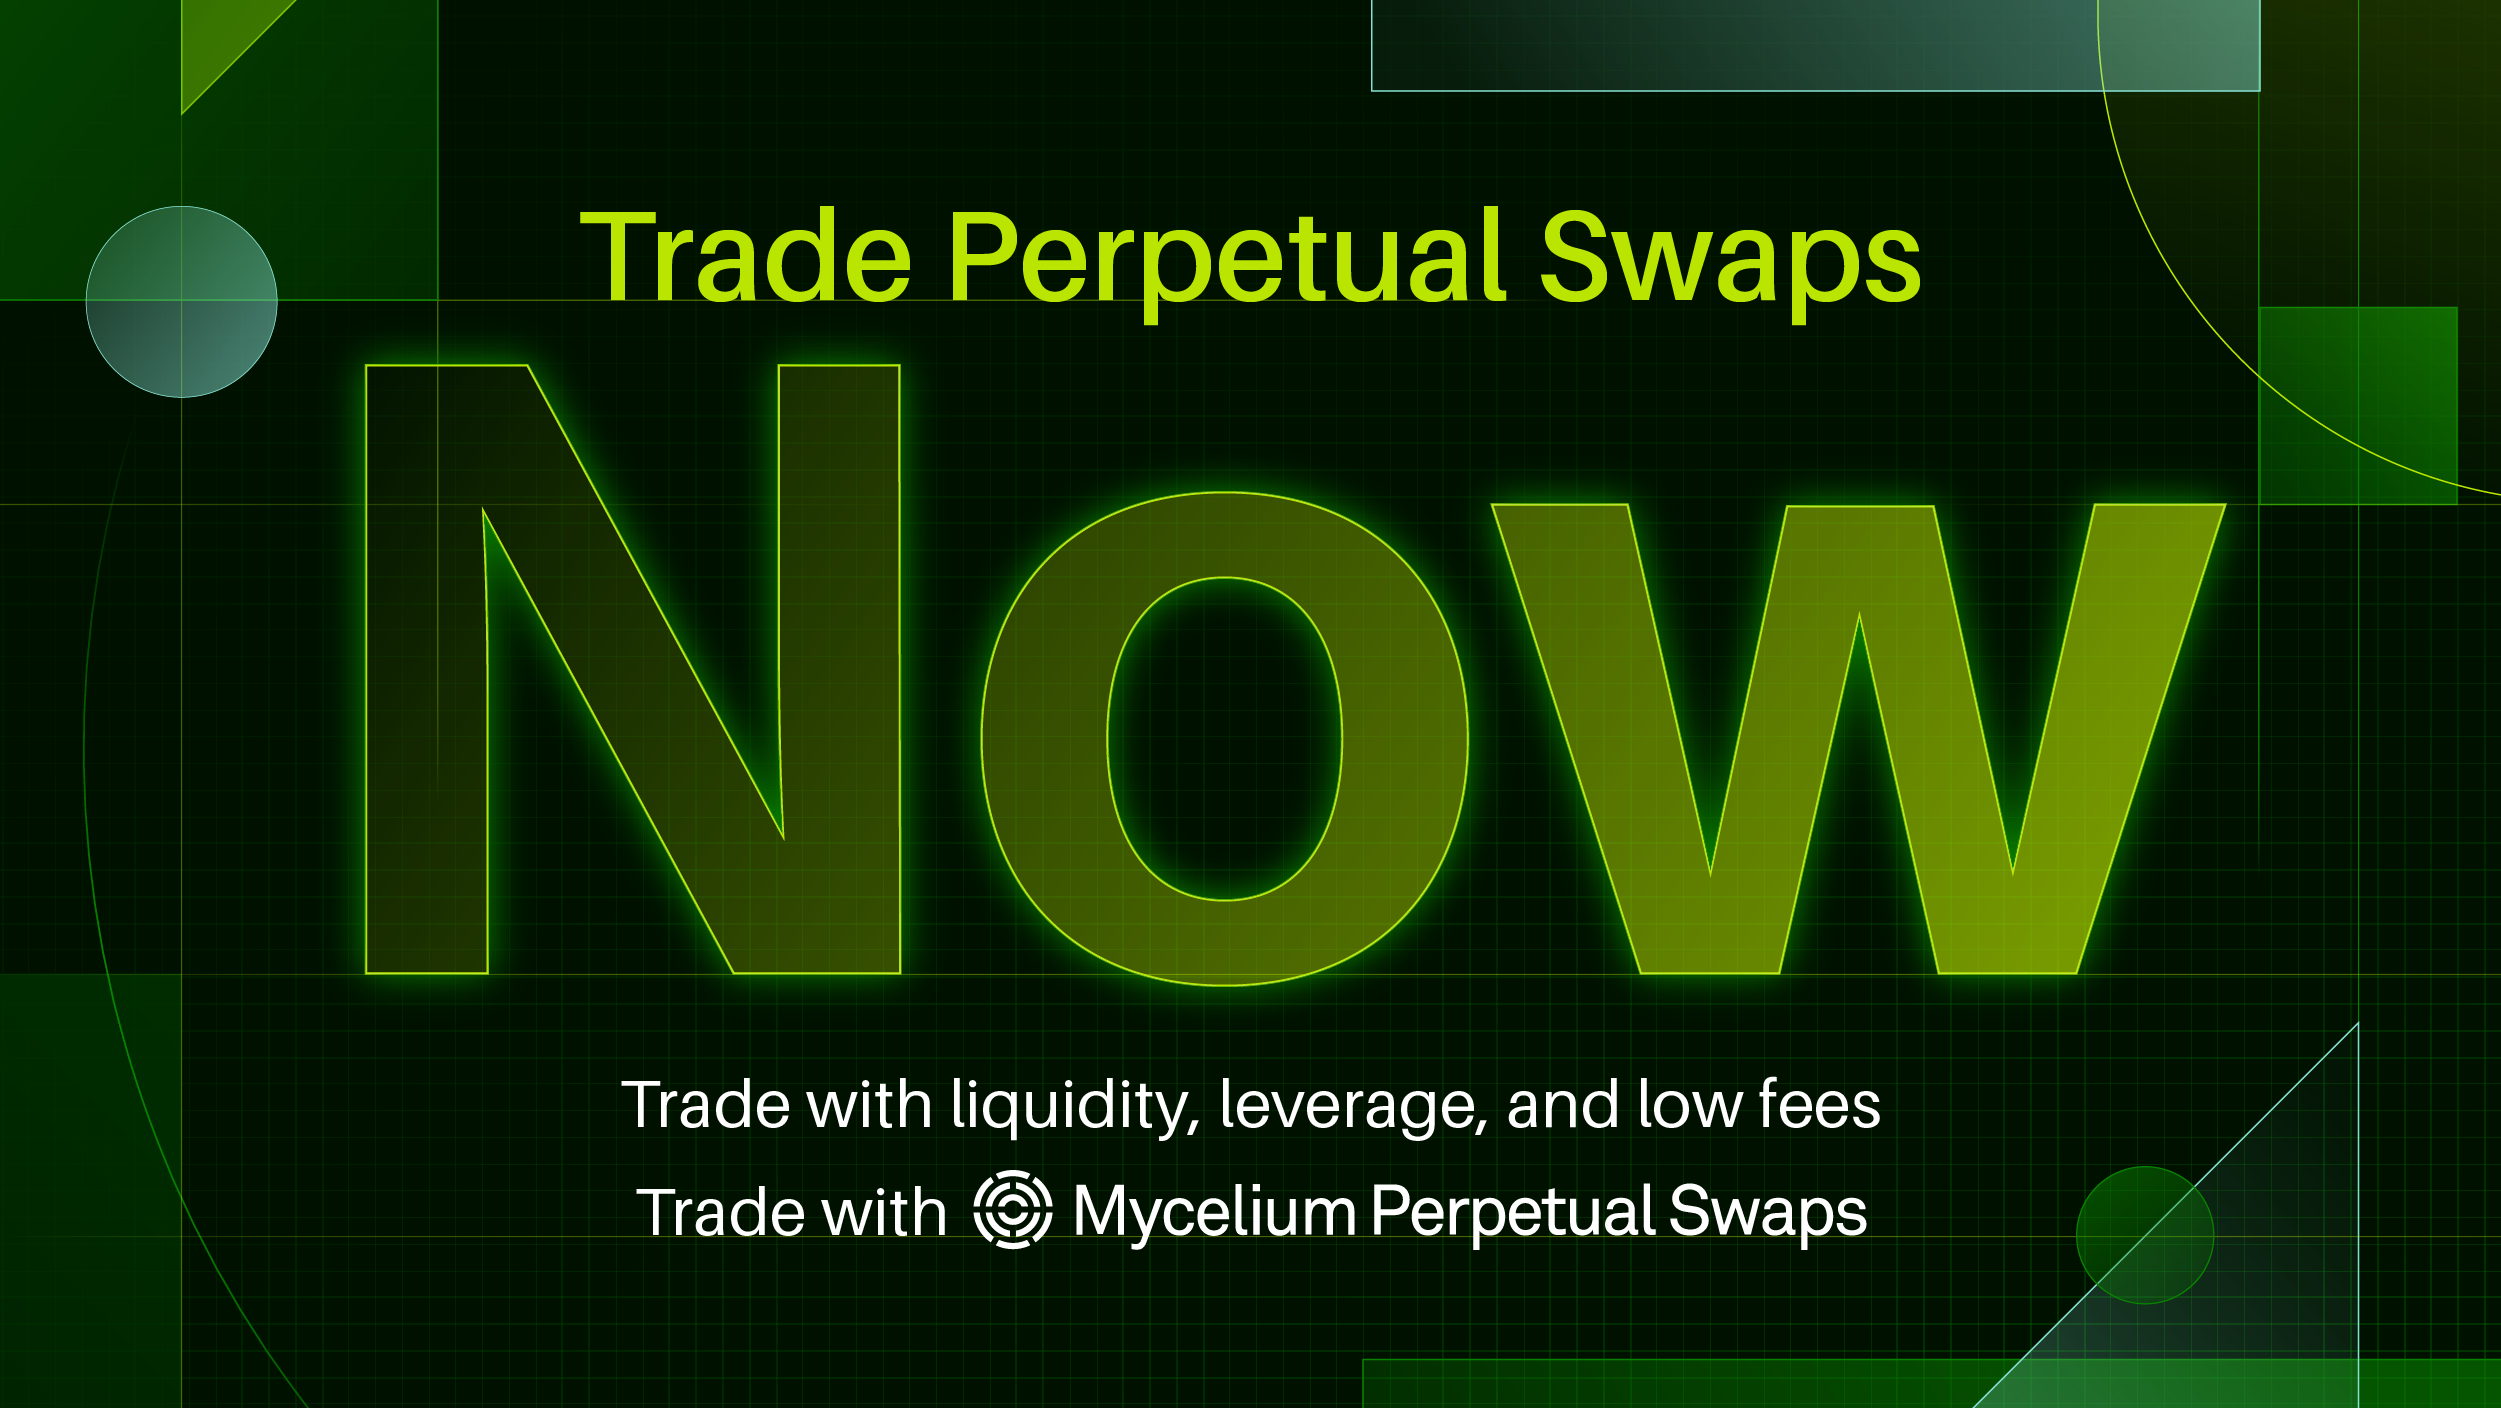 TLDR: Trader Incentives on Mycelium Perpetual Swaps